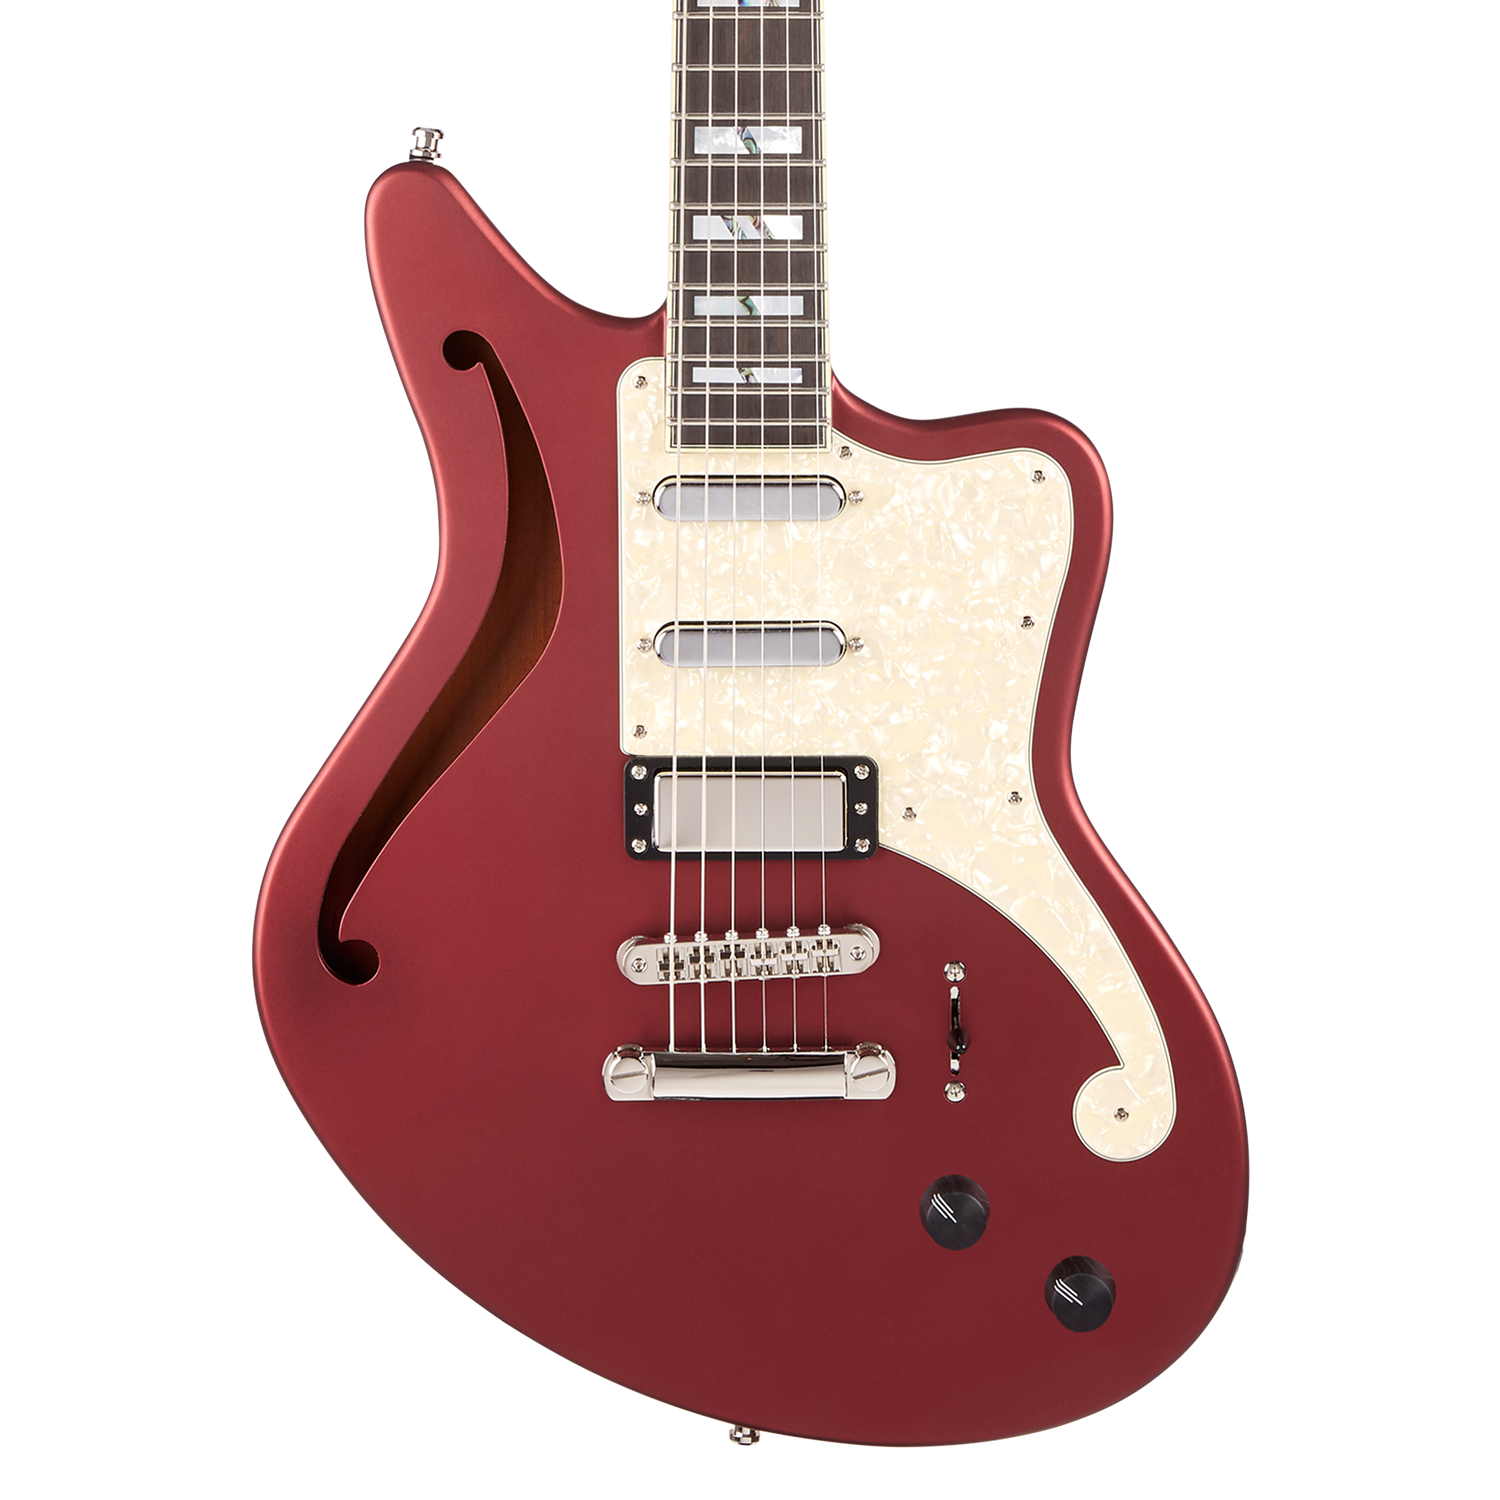 D'Angelico Deluxe Bedford SH Limited Edition - Matte Wine